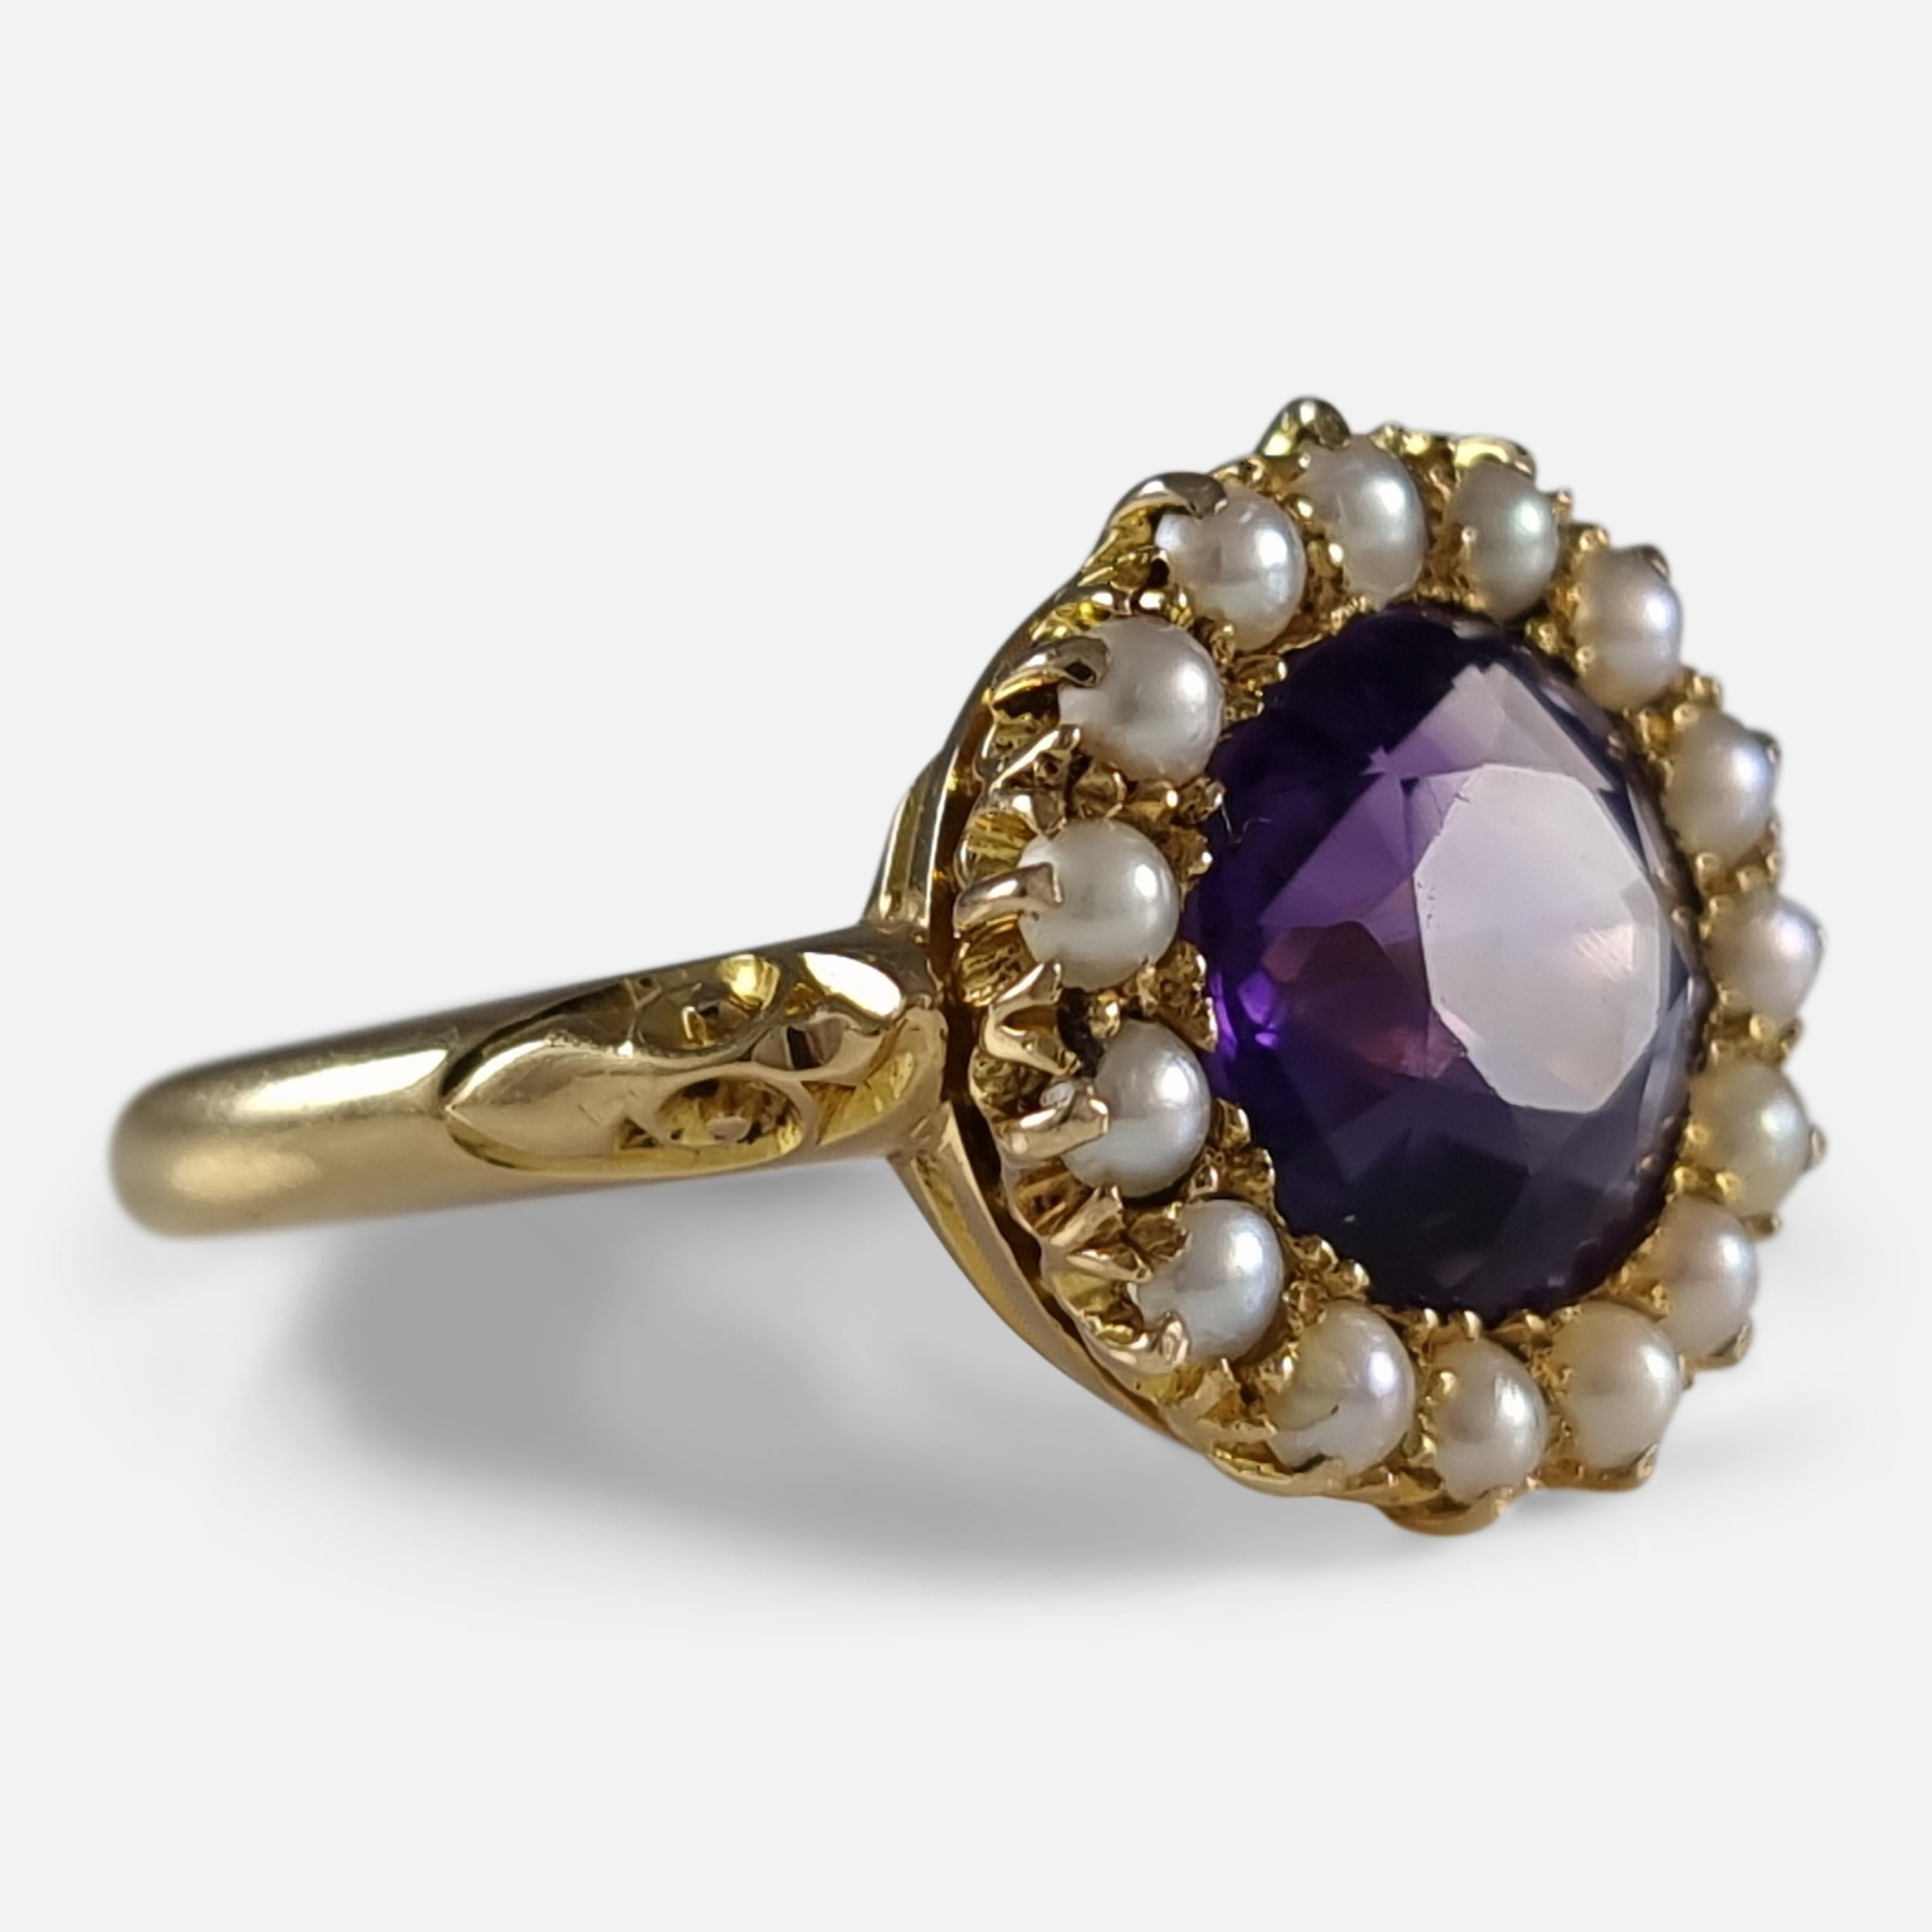 Women's or Men's Edwardian 18 Carat Gold Amethyst and Pearl Cluster Ring, 1909